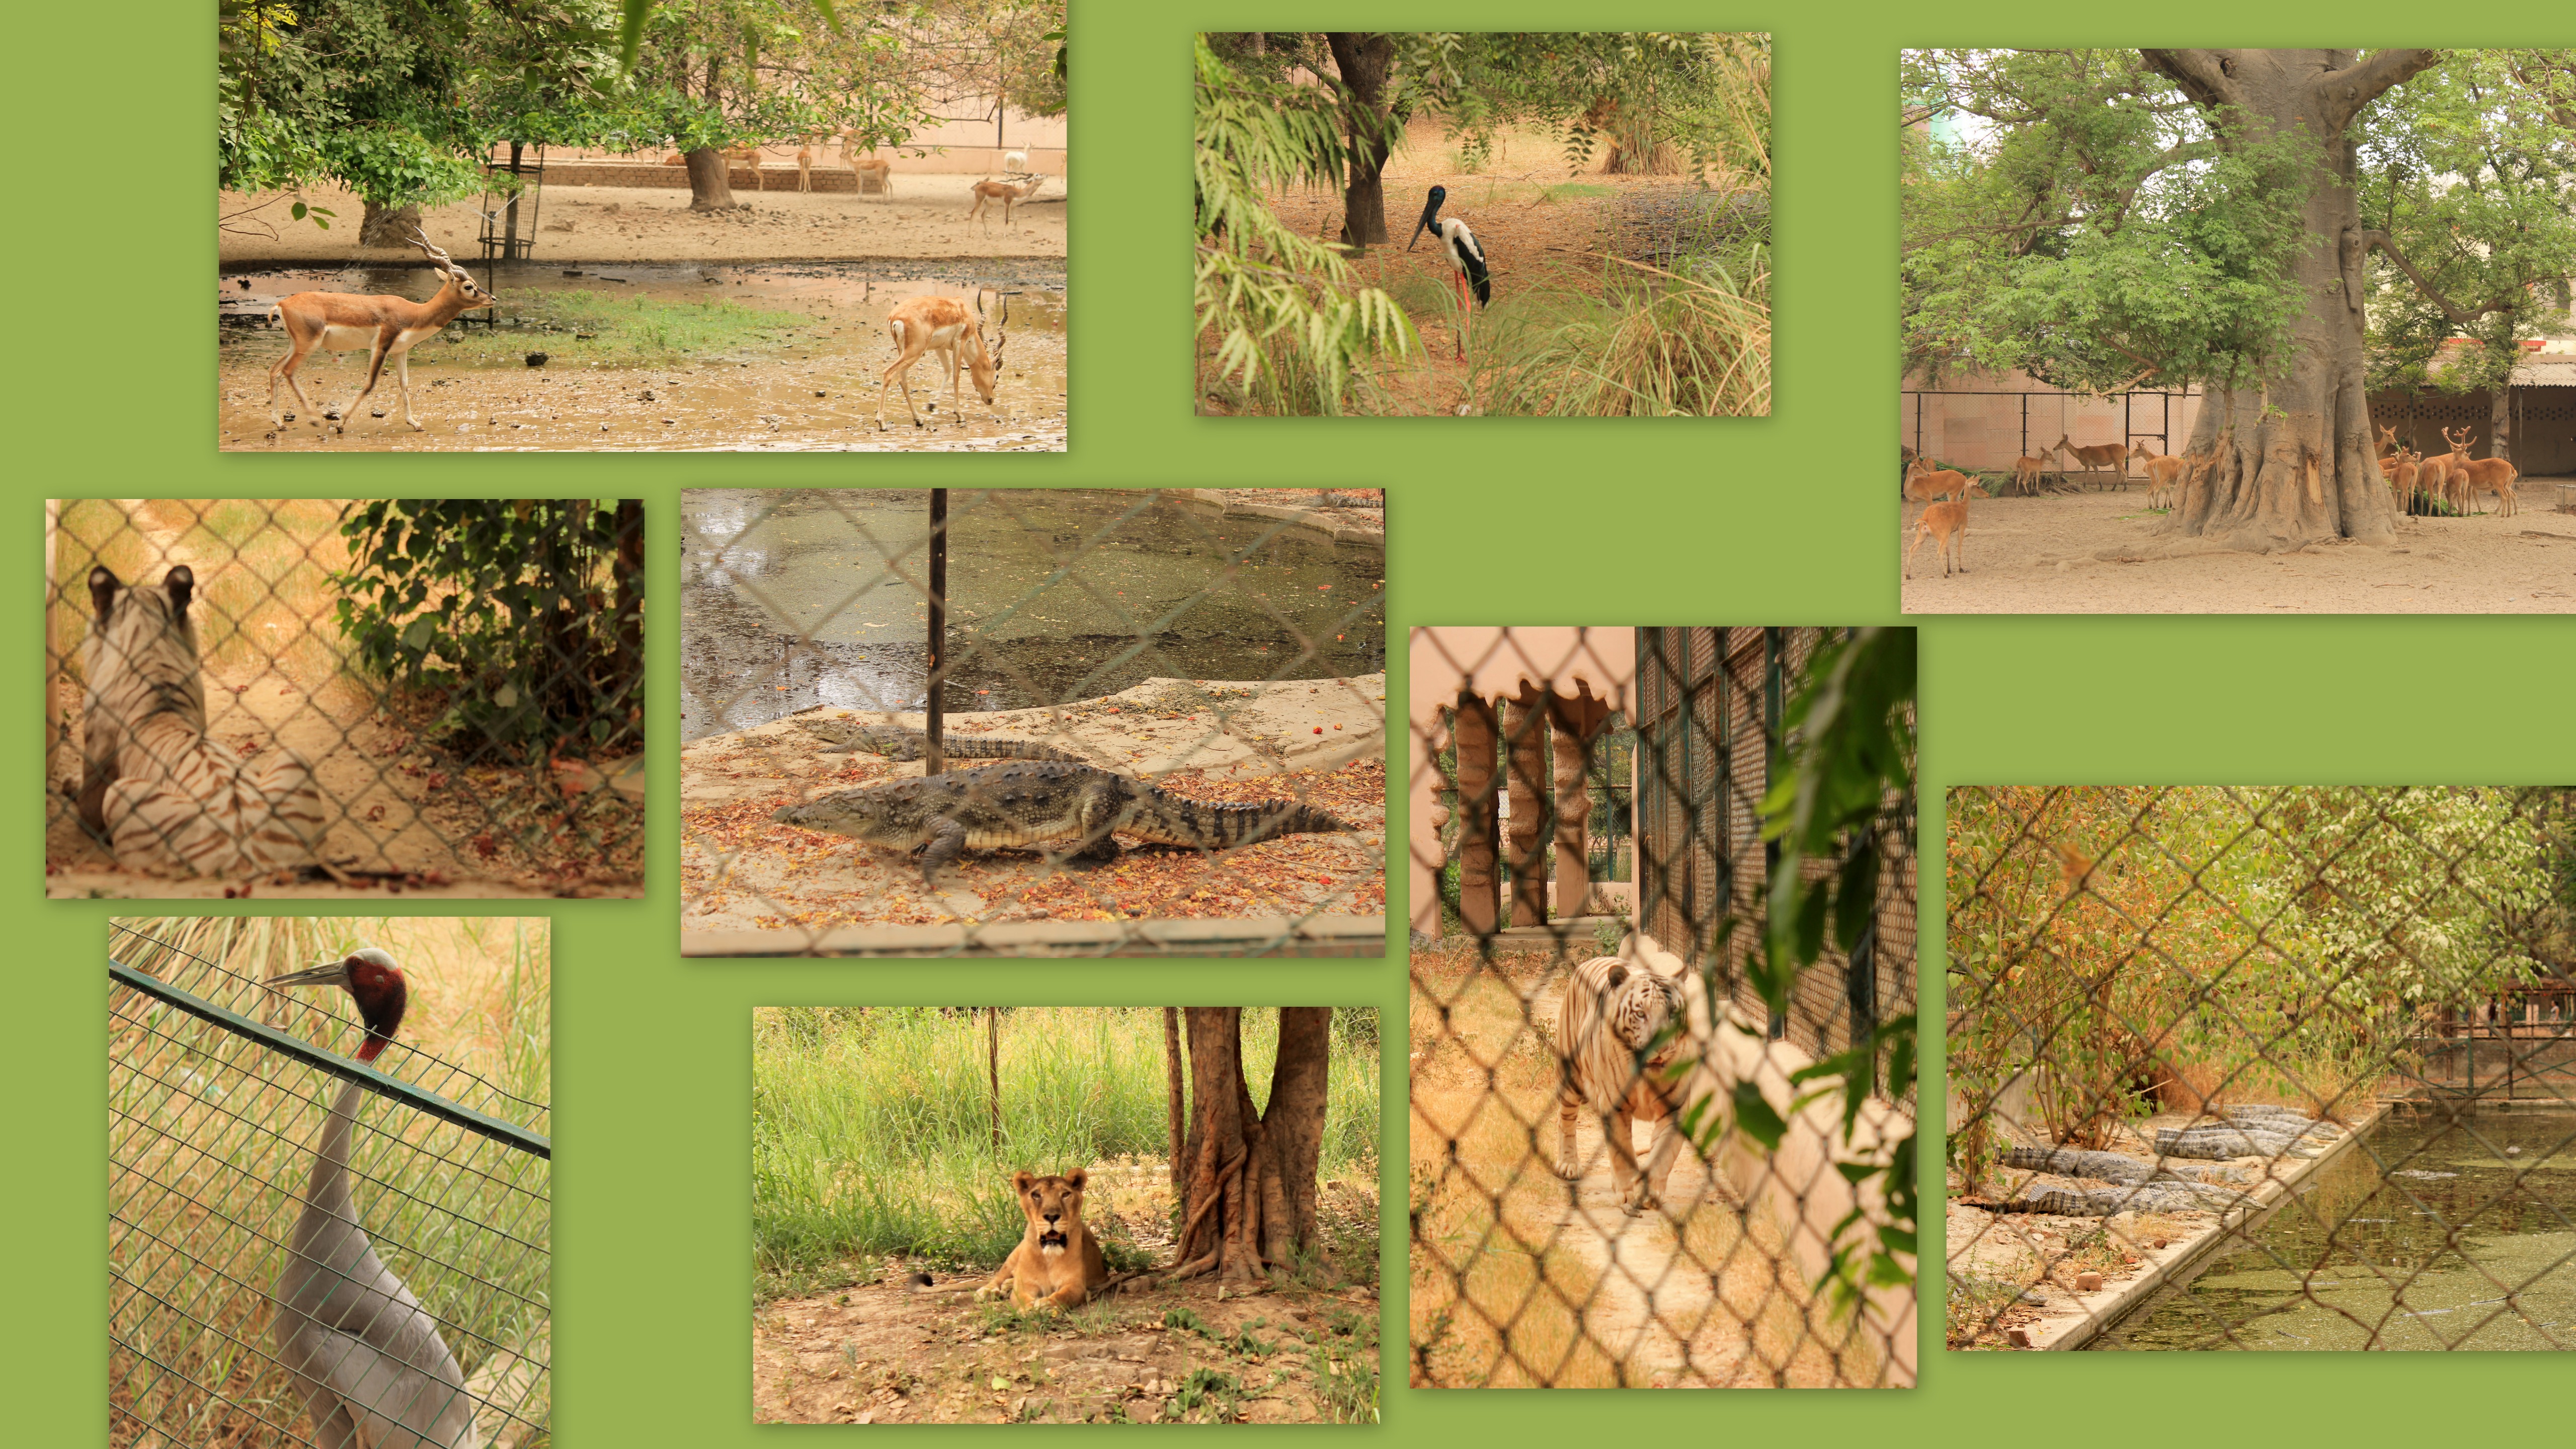 The Lucknow Zoological Garden - Lucknow Pulse